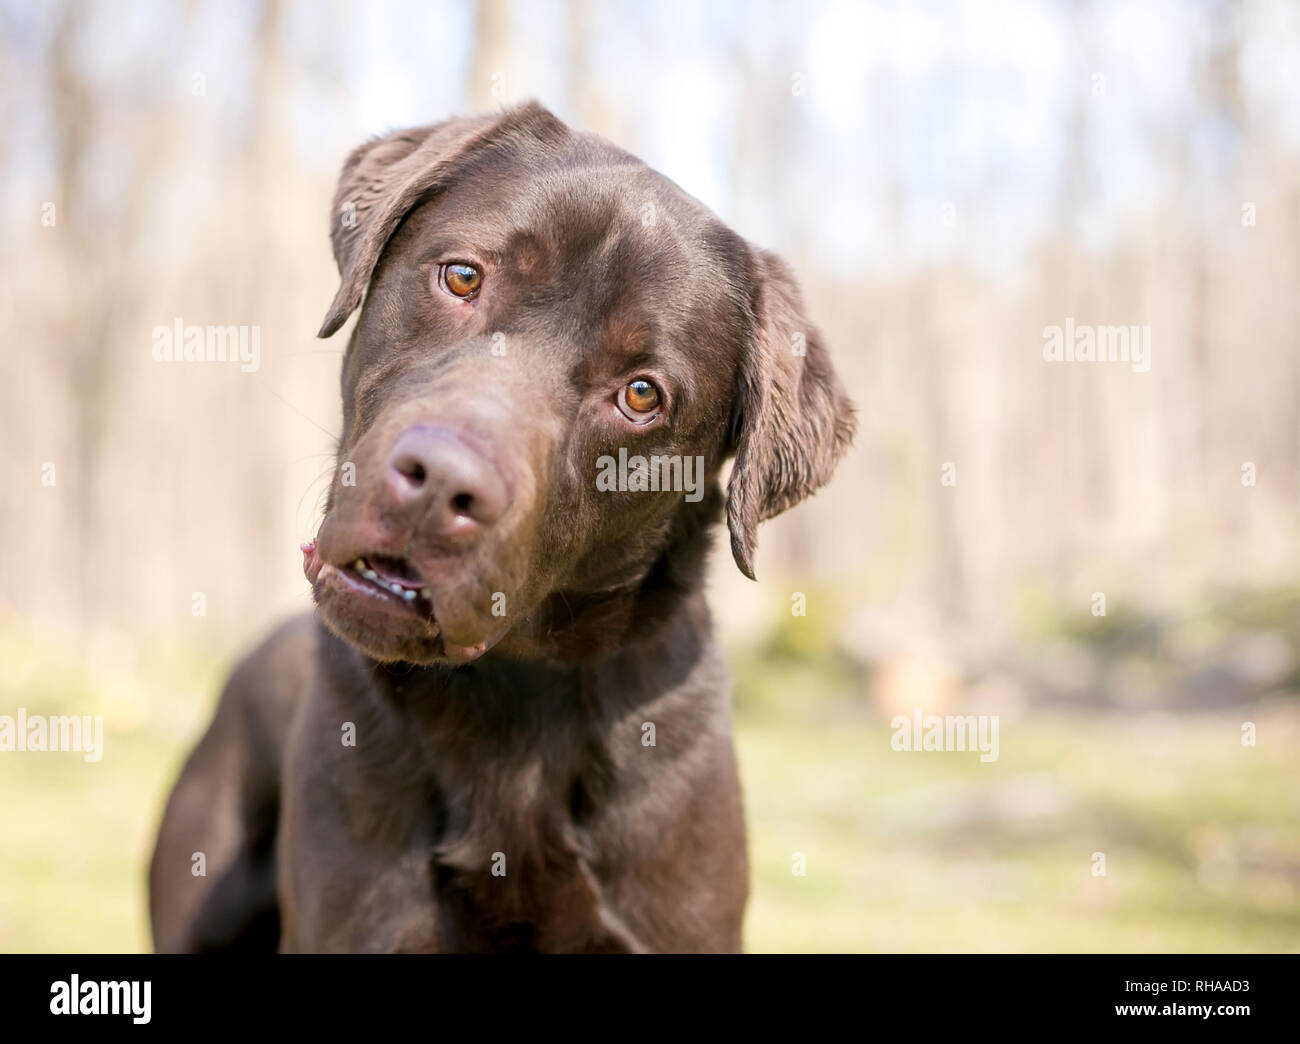 A purebred Chocolate Labrador Retriever dog listening with a head tilt and a comical expression on its face Stock Photo